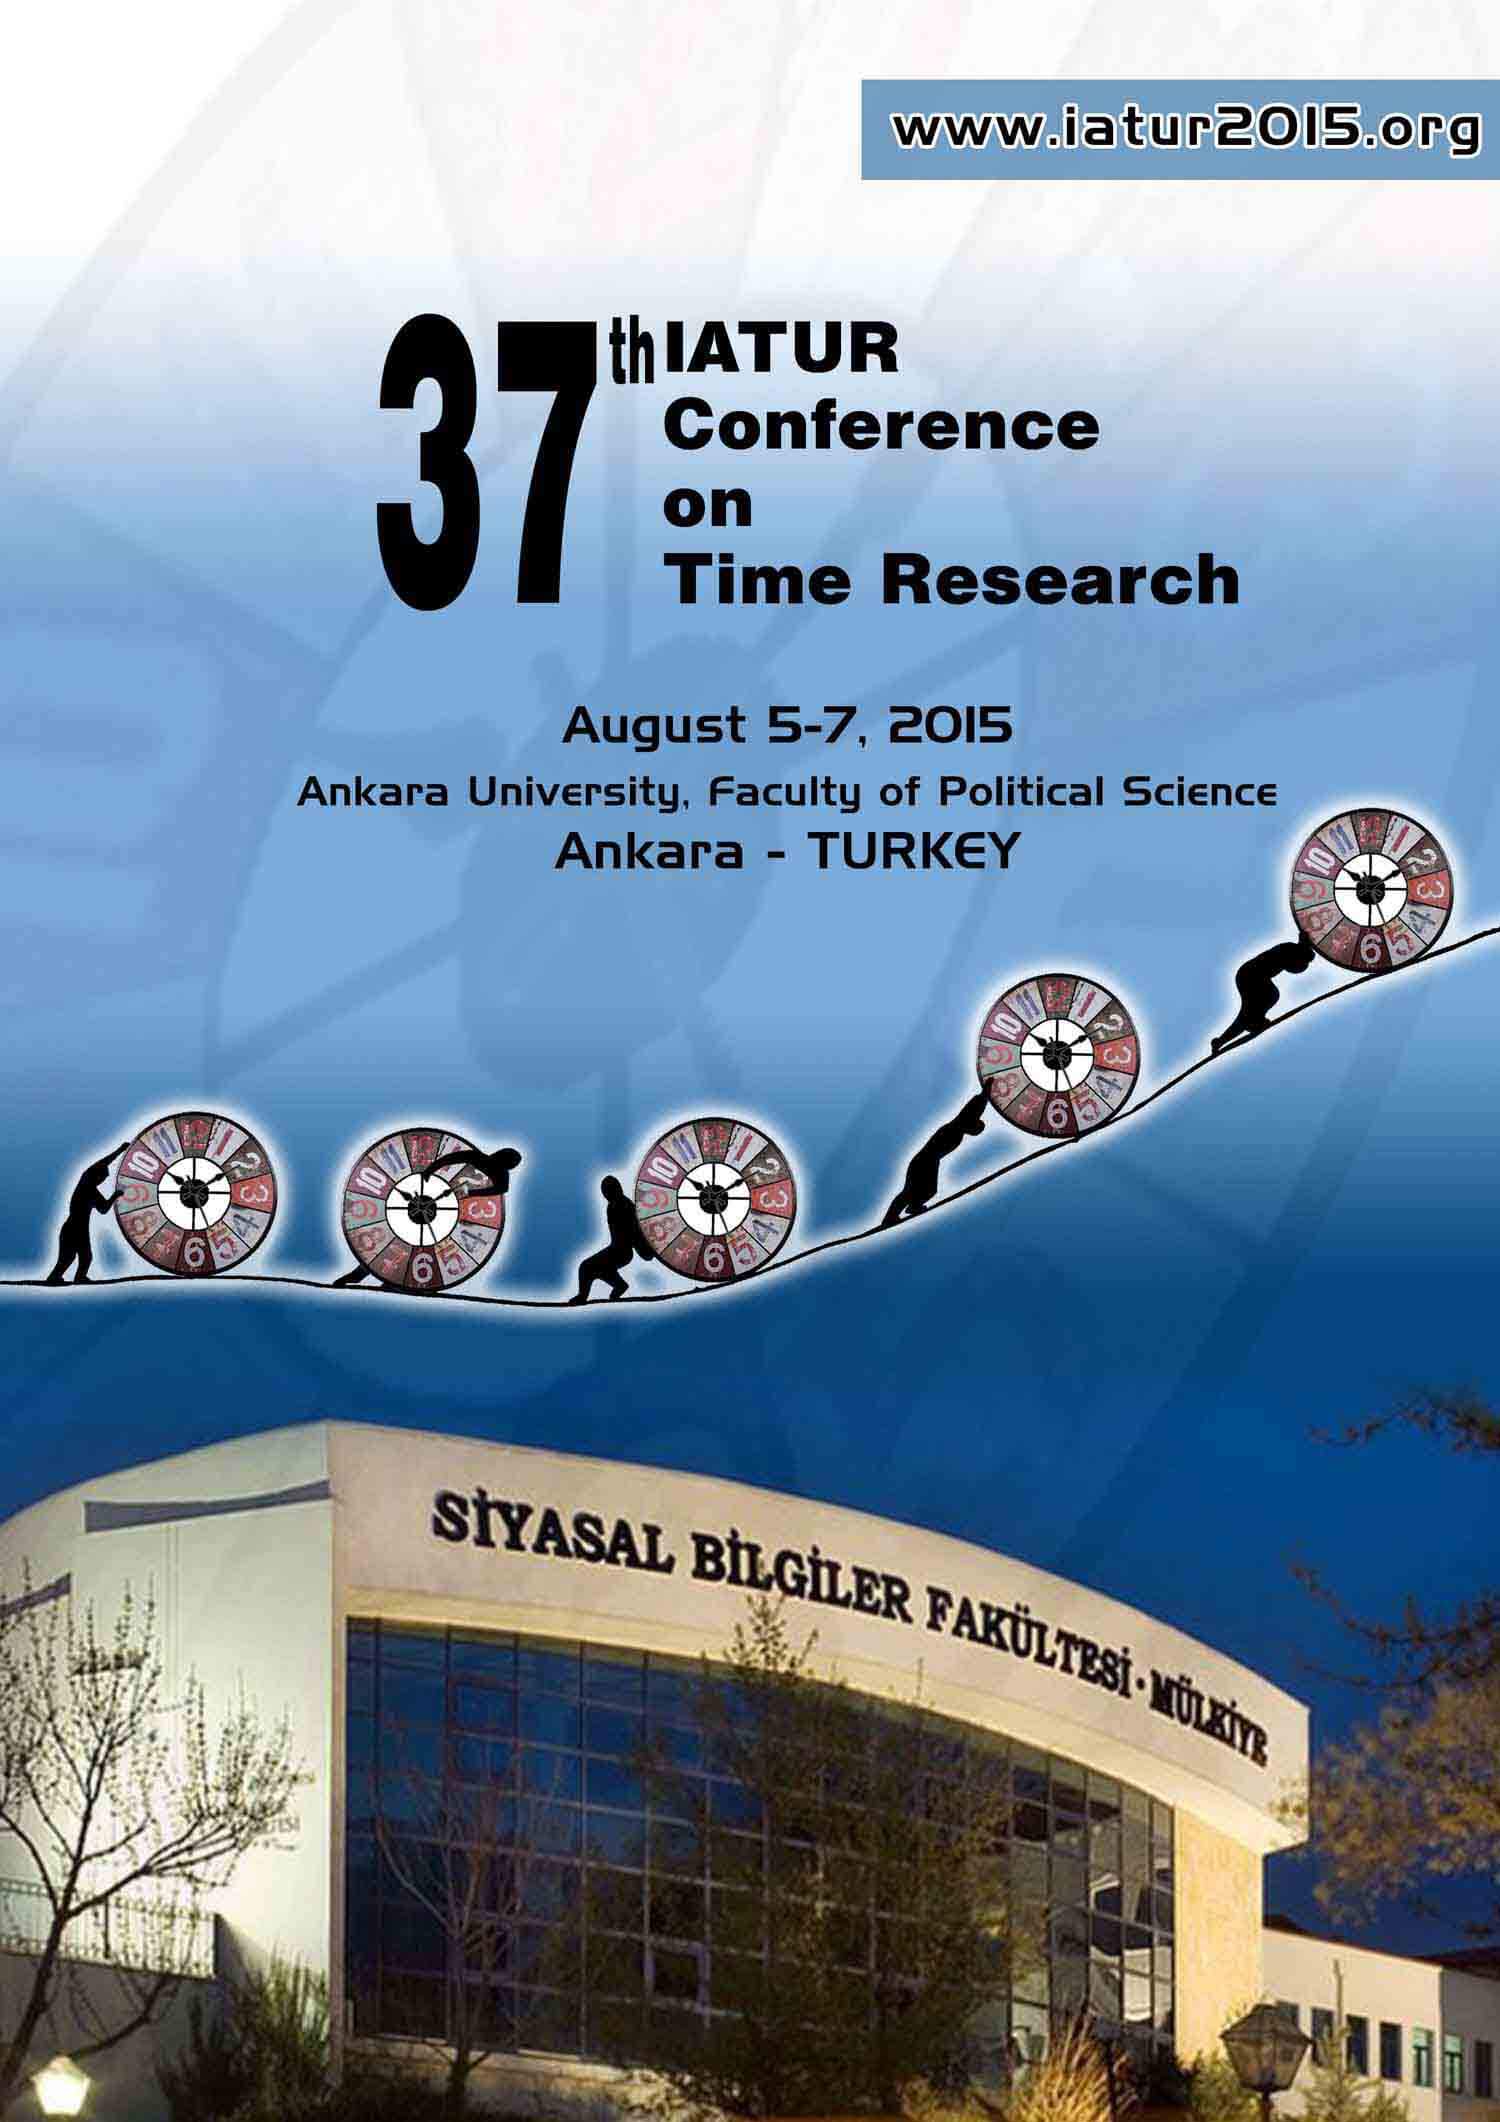 37th IATUR Conference on Time Research